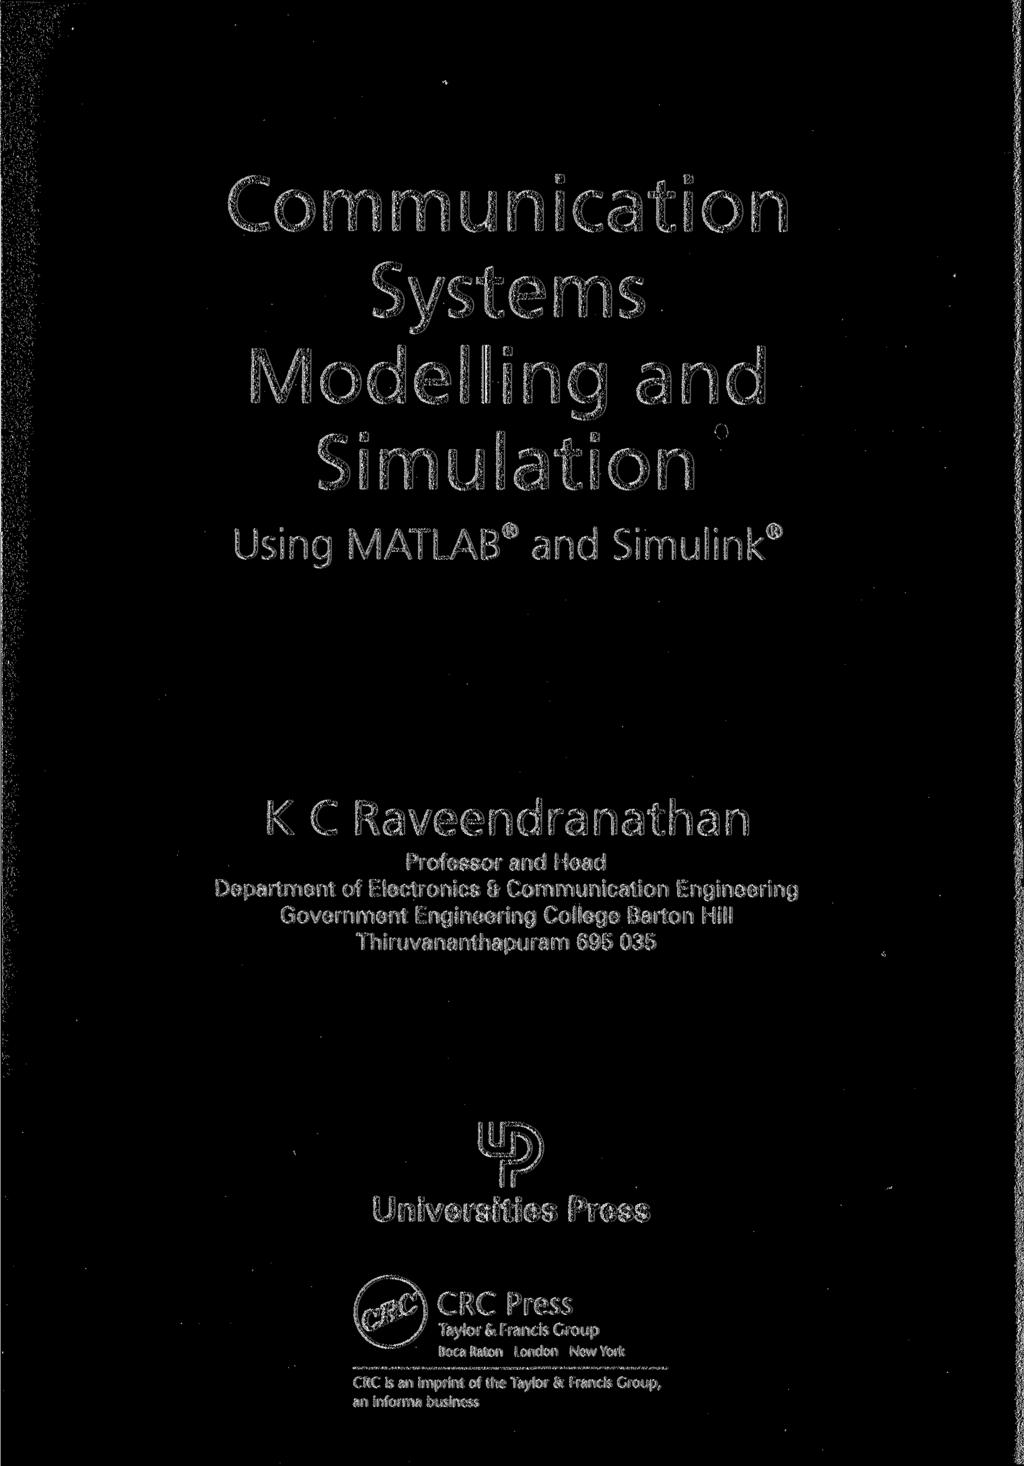 Communication Systems Modelling and Simulation Using MATLAB and Simulink К С Raveendranathan Professor and Head Department of Electronics & Communication Engineering Government Engineering